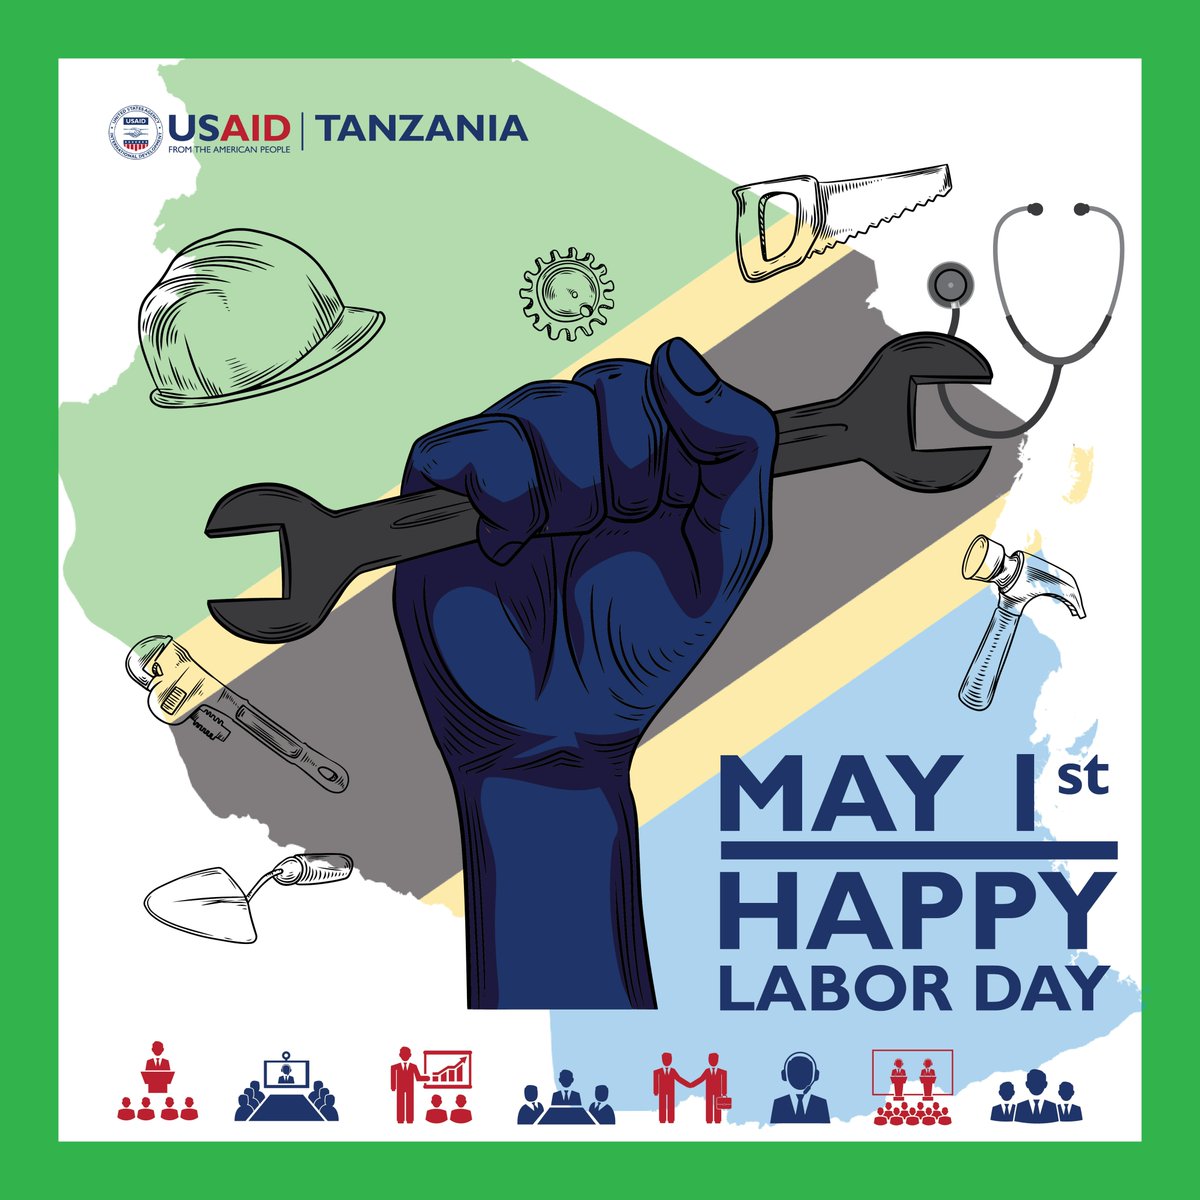 Happy Labor Day! Today, we celebrate all the hardworking staff at @USAID who work tirelessly to ensure better livelihoods for the ordinary Tanzanian. #meimosi #workersday